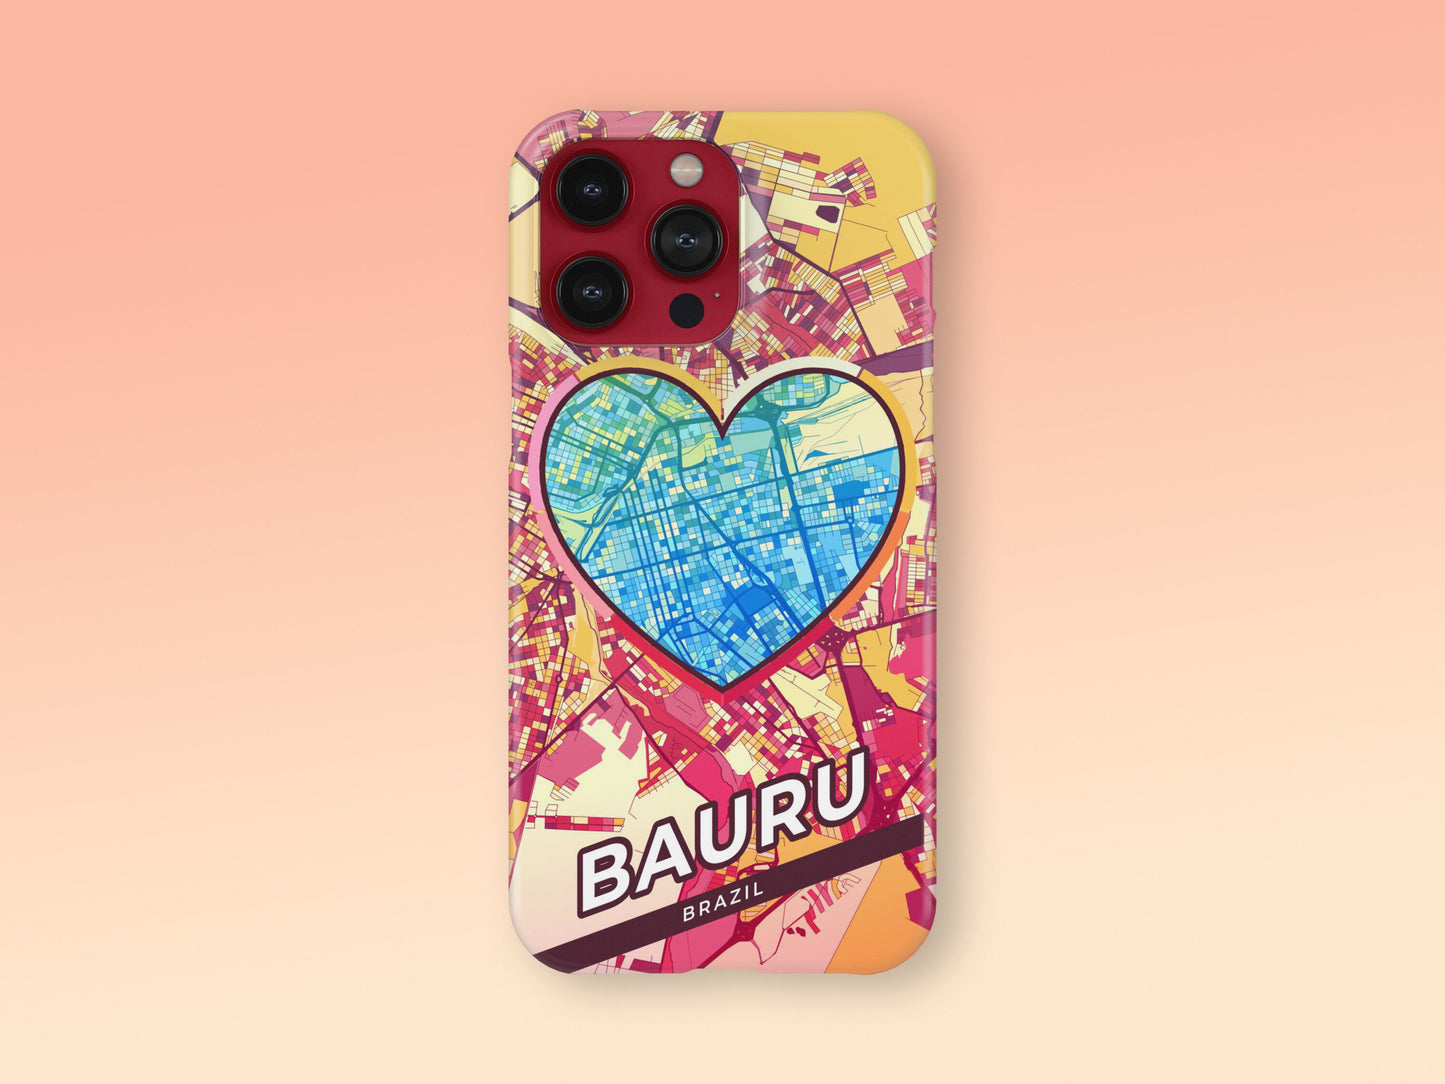 Bauru Brazil slim phone case with colorful icon. Birthday, wedding or housewarming gift. Couple match cases. 2